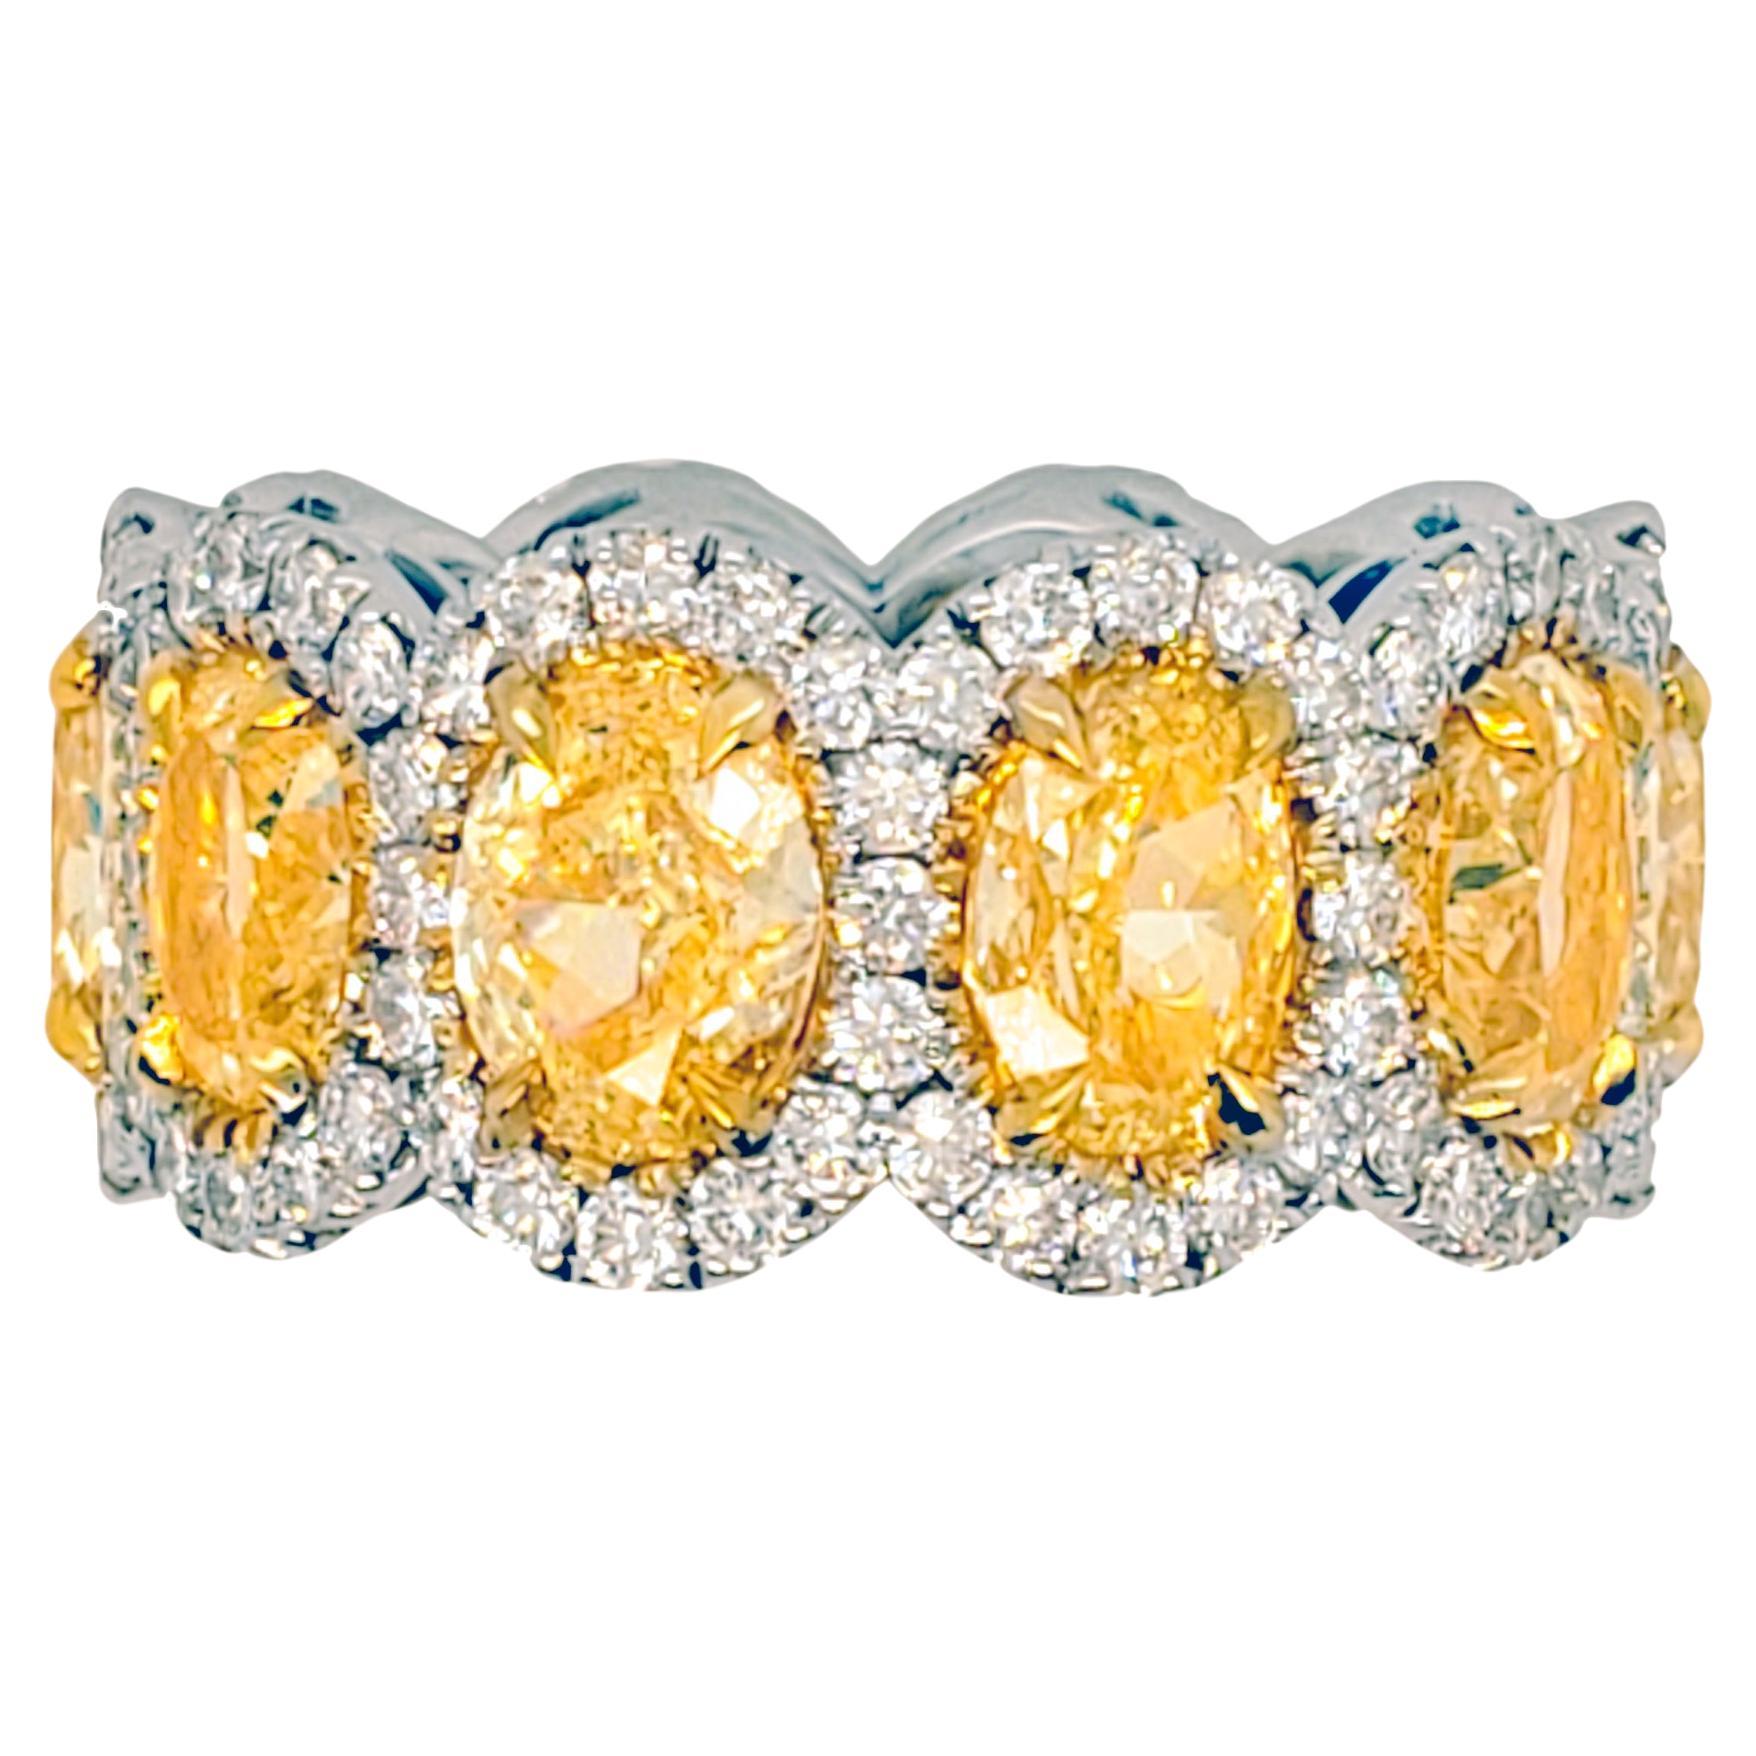 Diana M. 18KT TWO TONE GOLD YELLOW DIAMONDS WITH HALO OVAL BAND.  For Sale